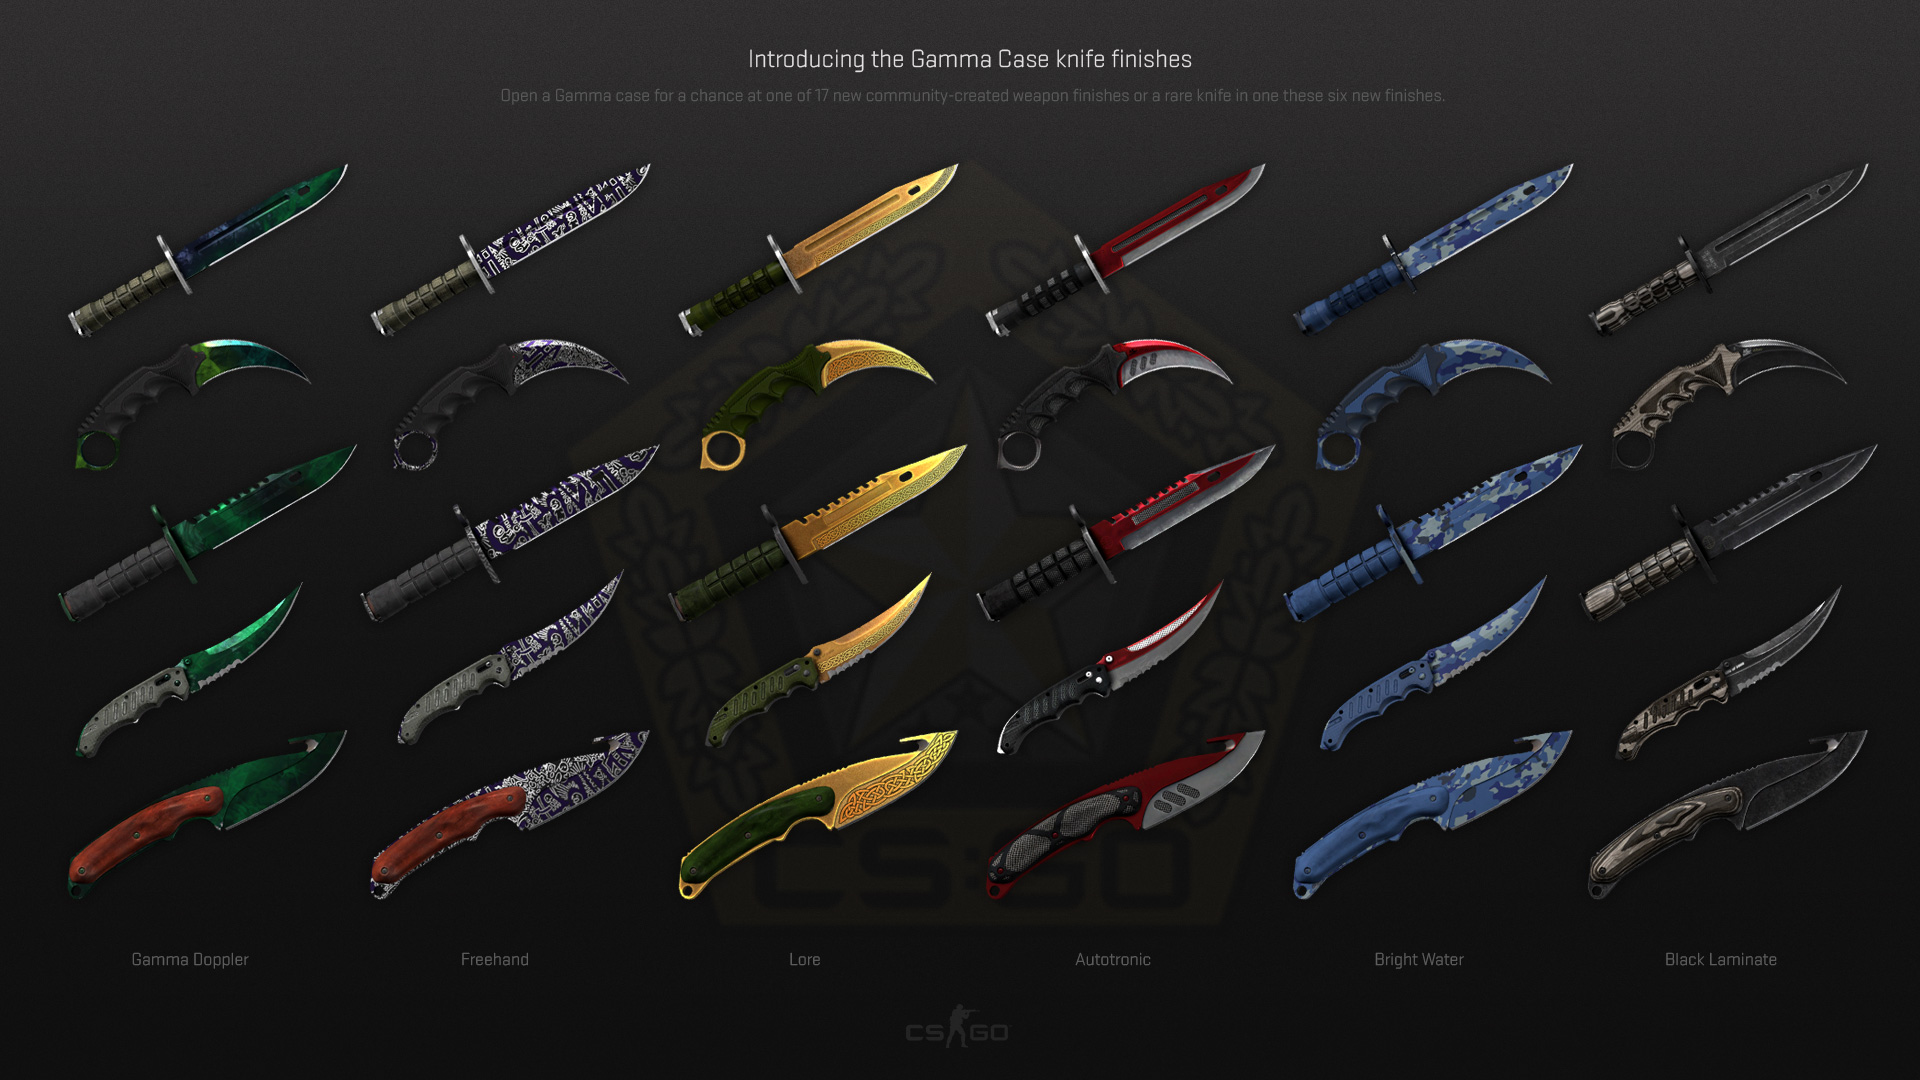 The Gamma Collection Knives